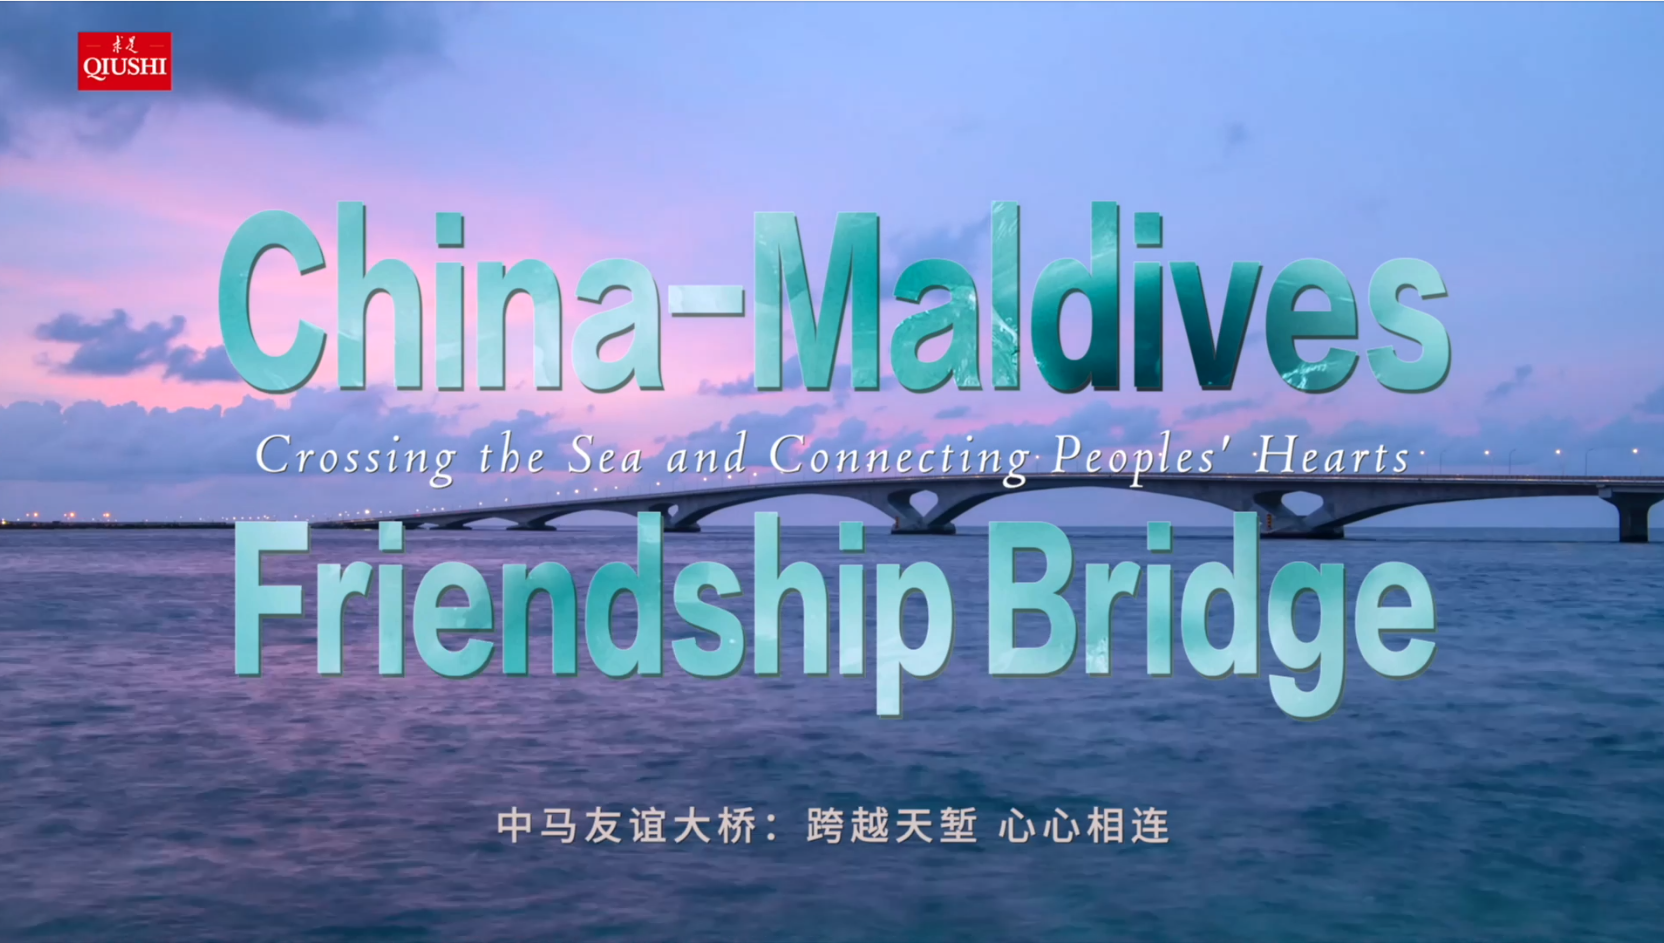 China-Maldives Friendship Bridge: Crossing the Sea and Connecting Peoples' Hearts 